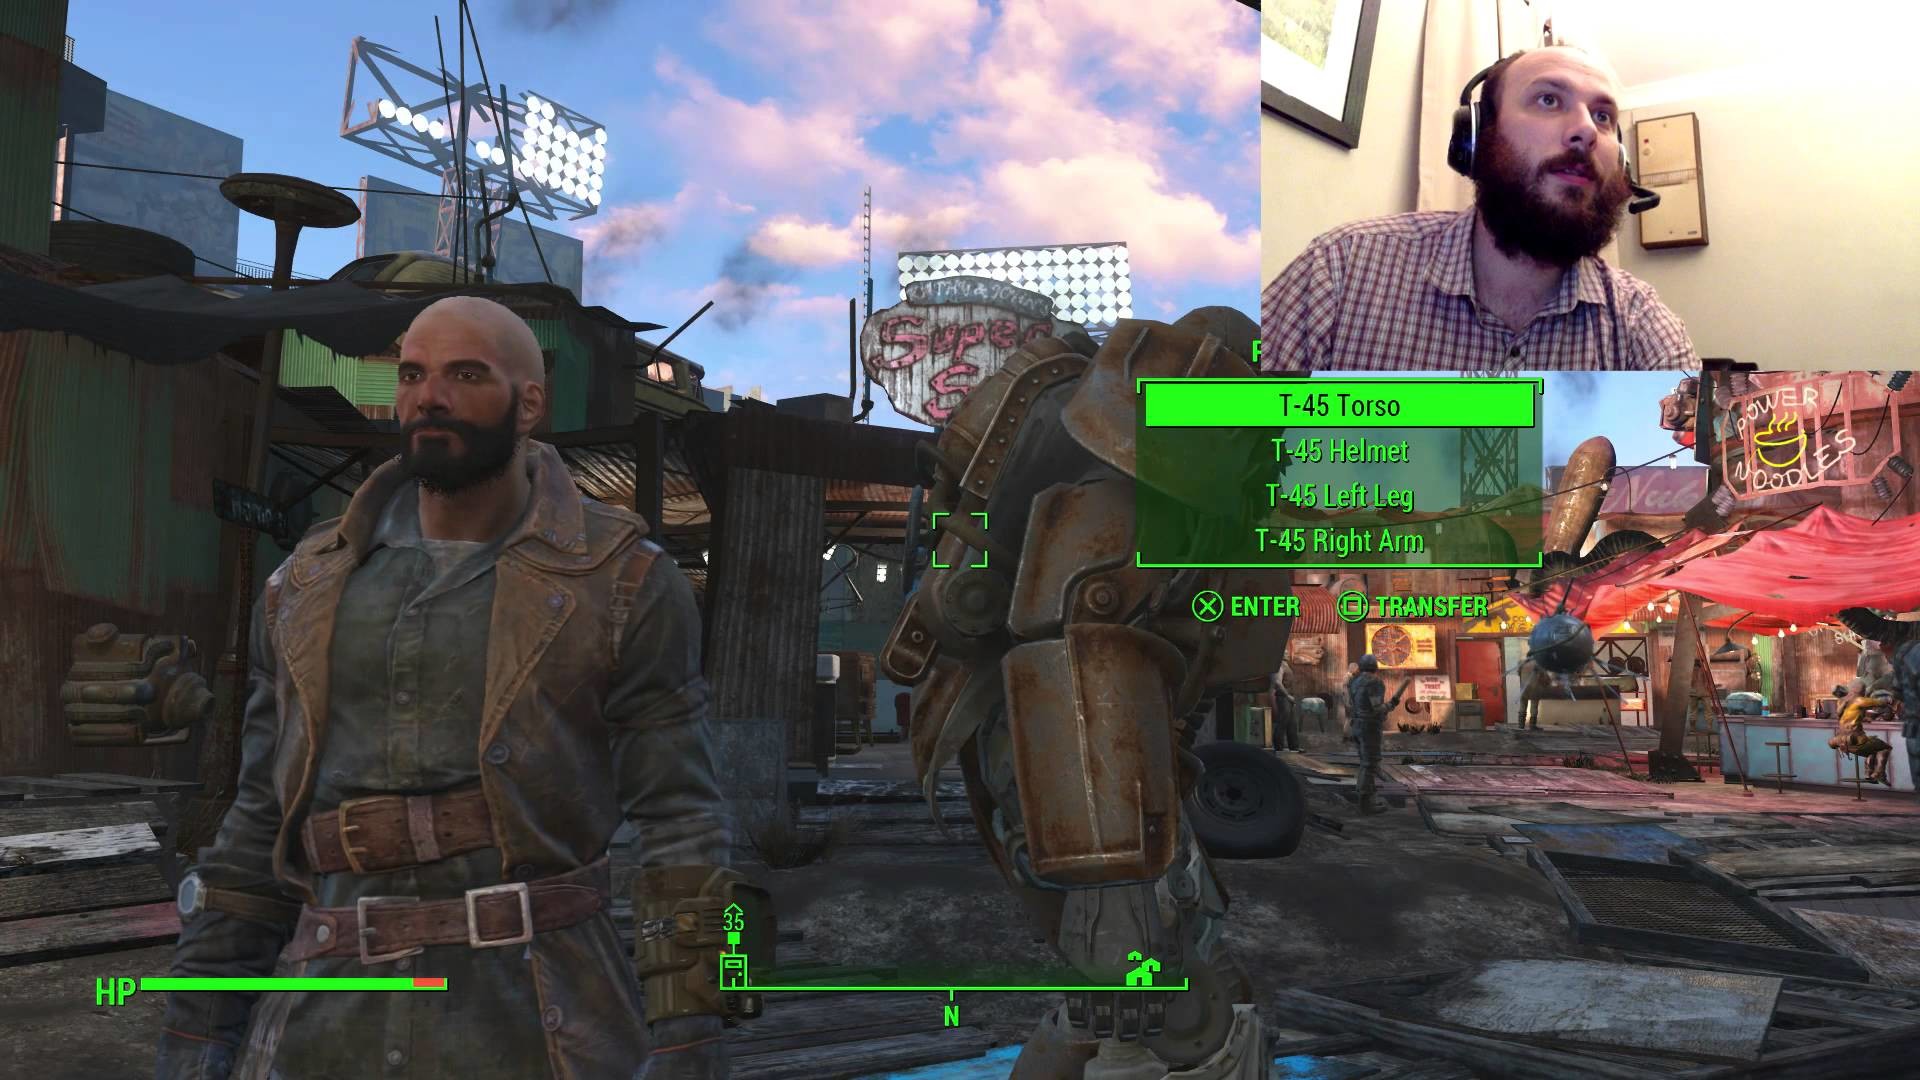 1920x1080 Fallout 4 - iPhone App and Pipboy